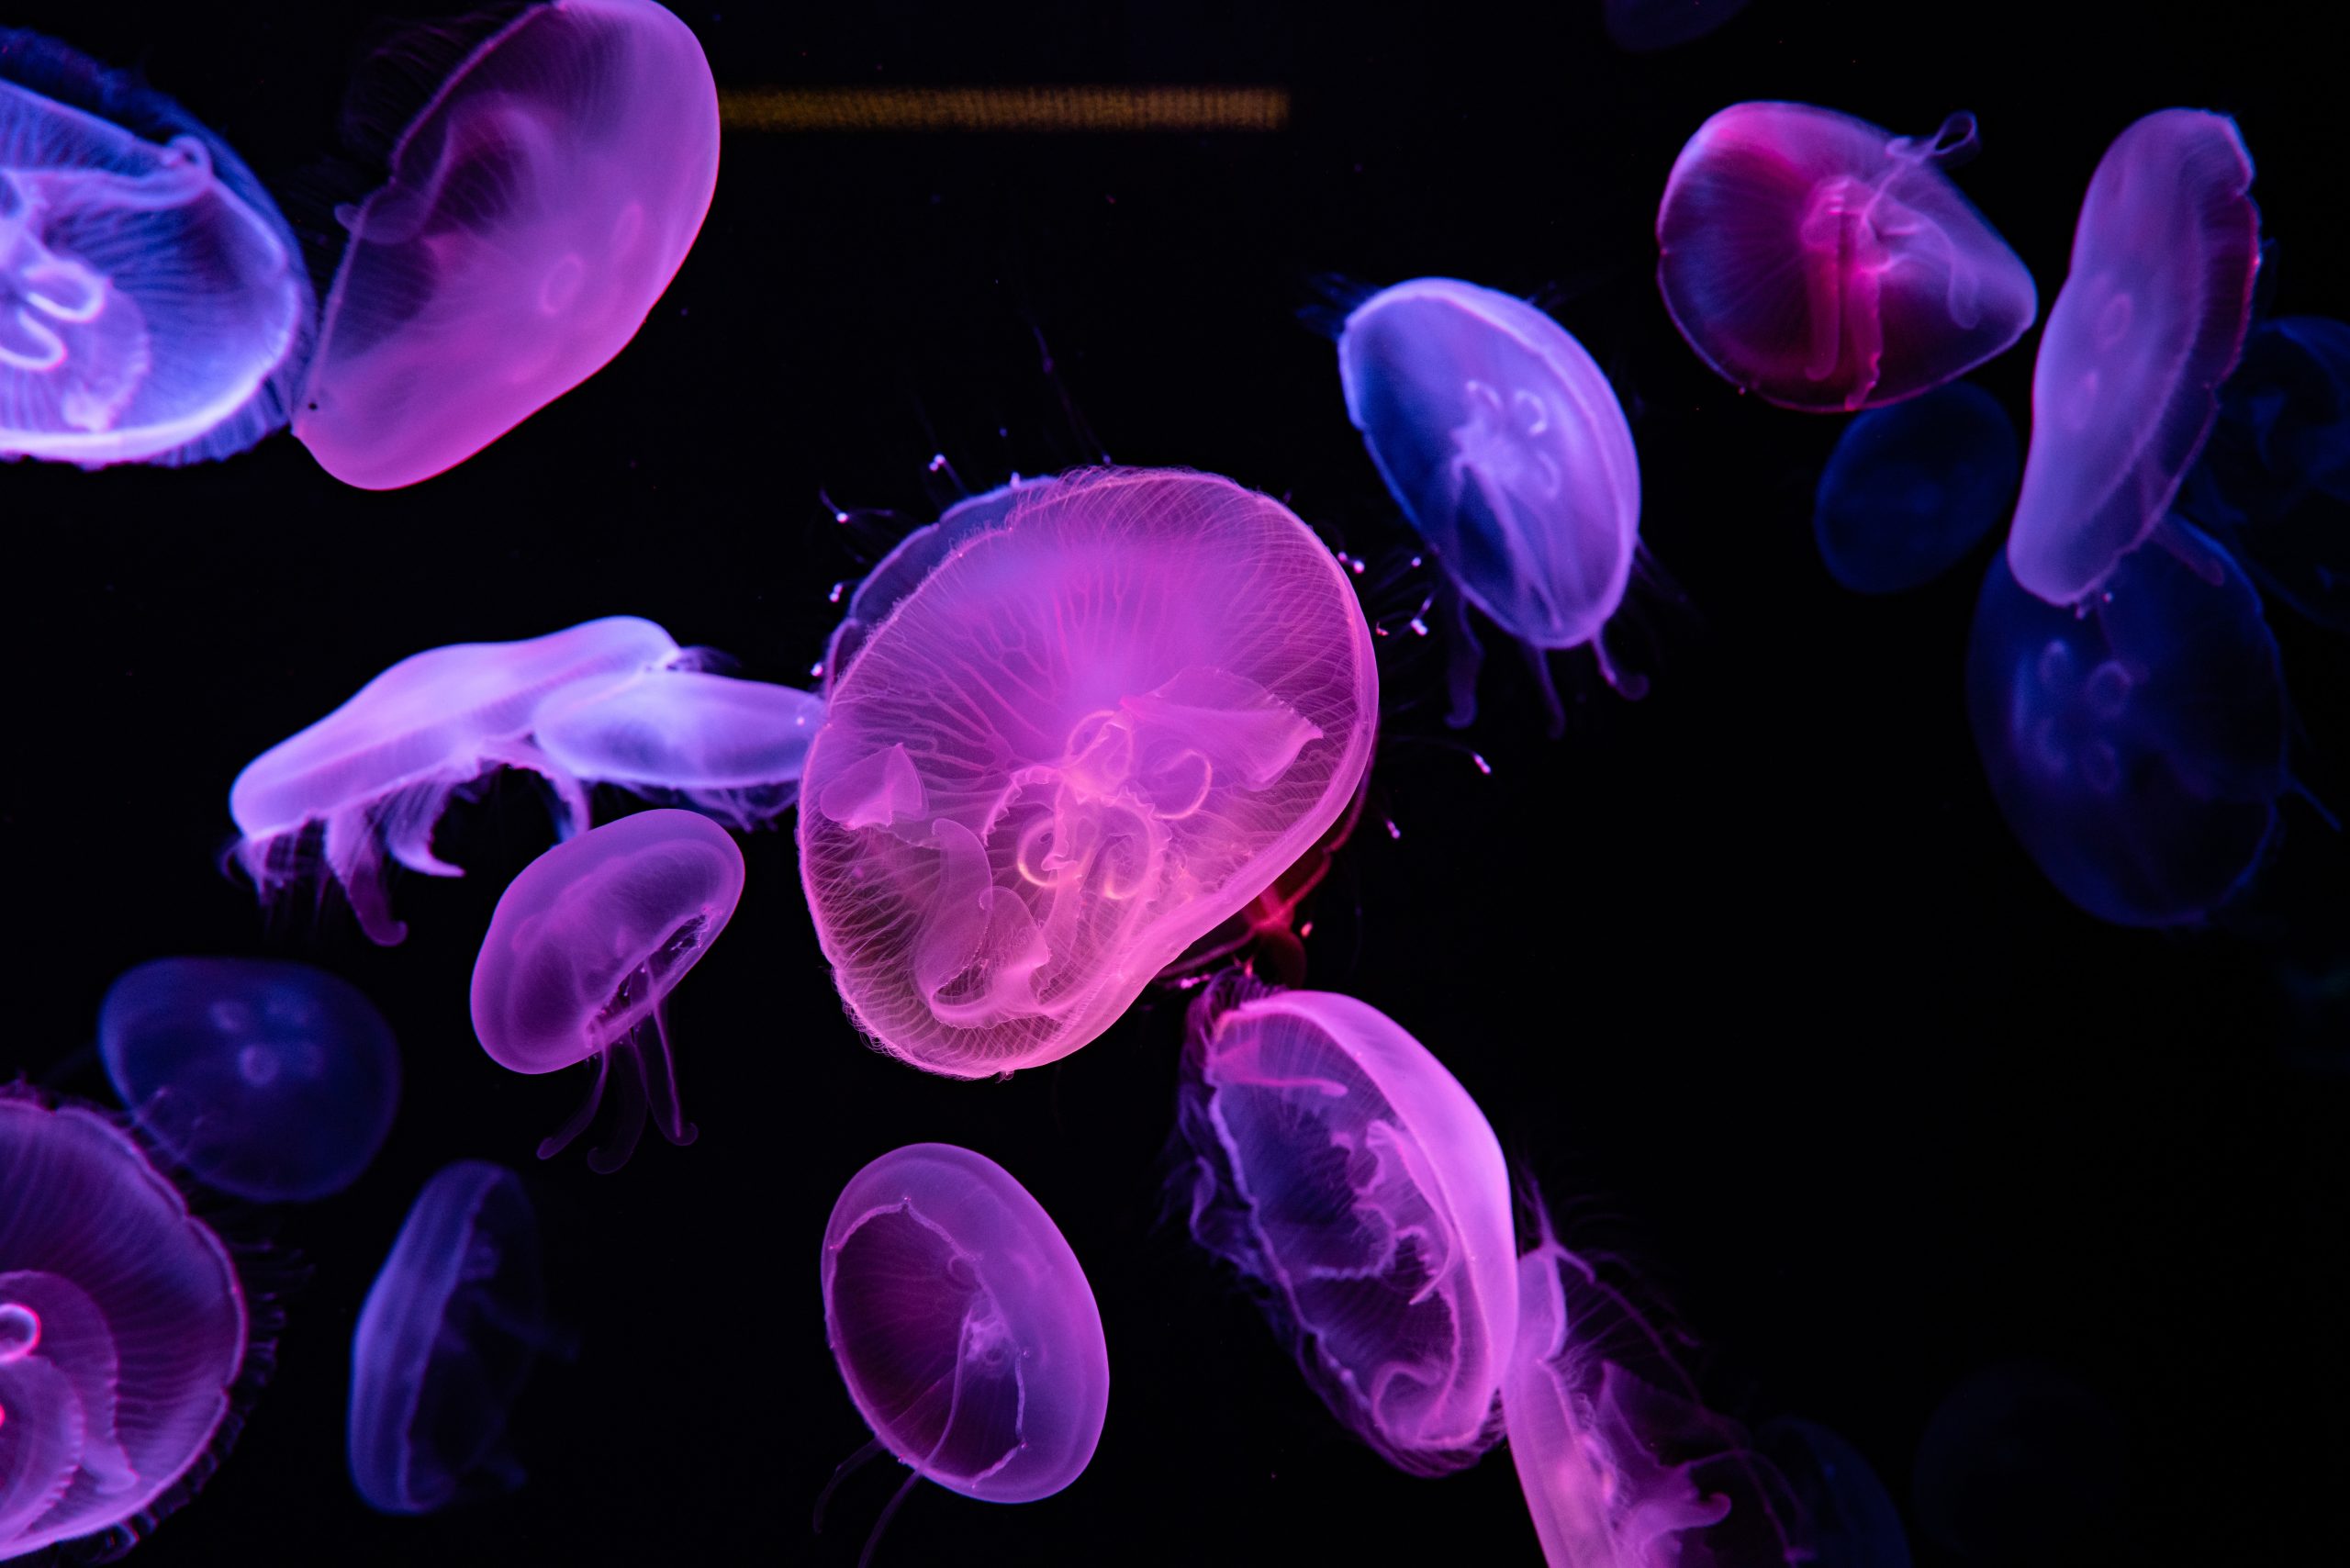 Purple Jellyfish in Water in Close Up Shot